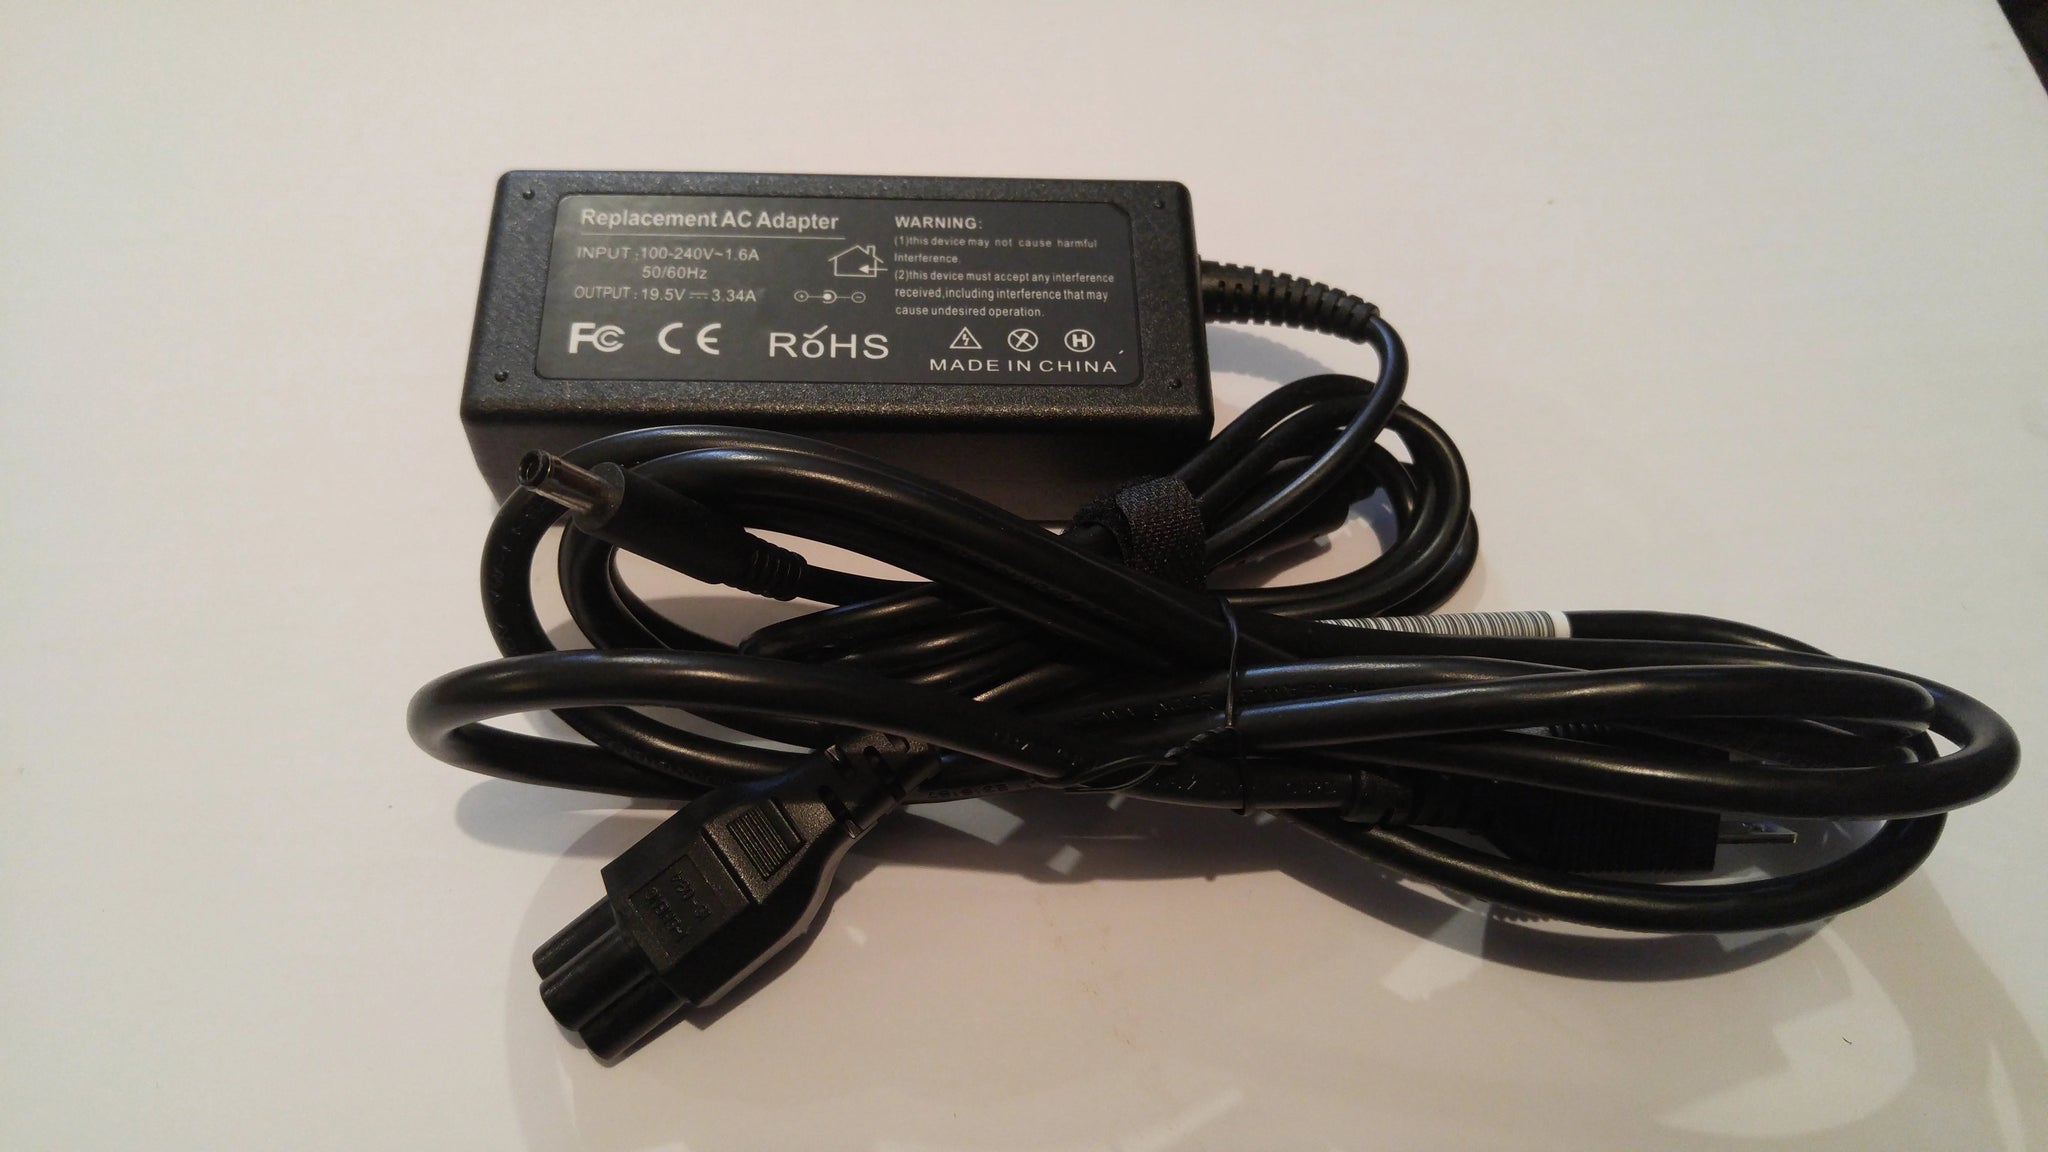 Replacement Laptop Adapter 65W 19.5V 3.34A (4.5 x 3.0 mm pin) for Dell Inspiron 11 3000 3147, 3148, 13 7347, 7352